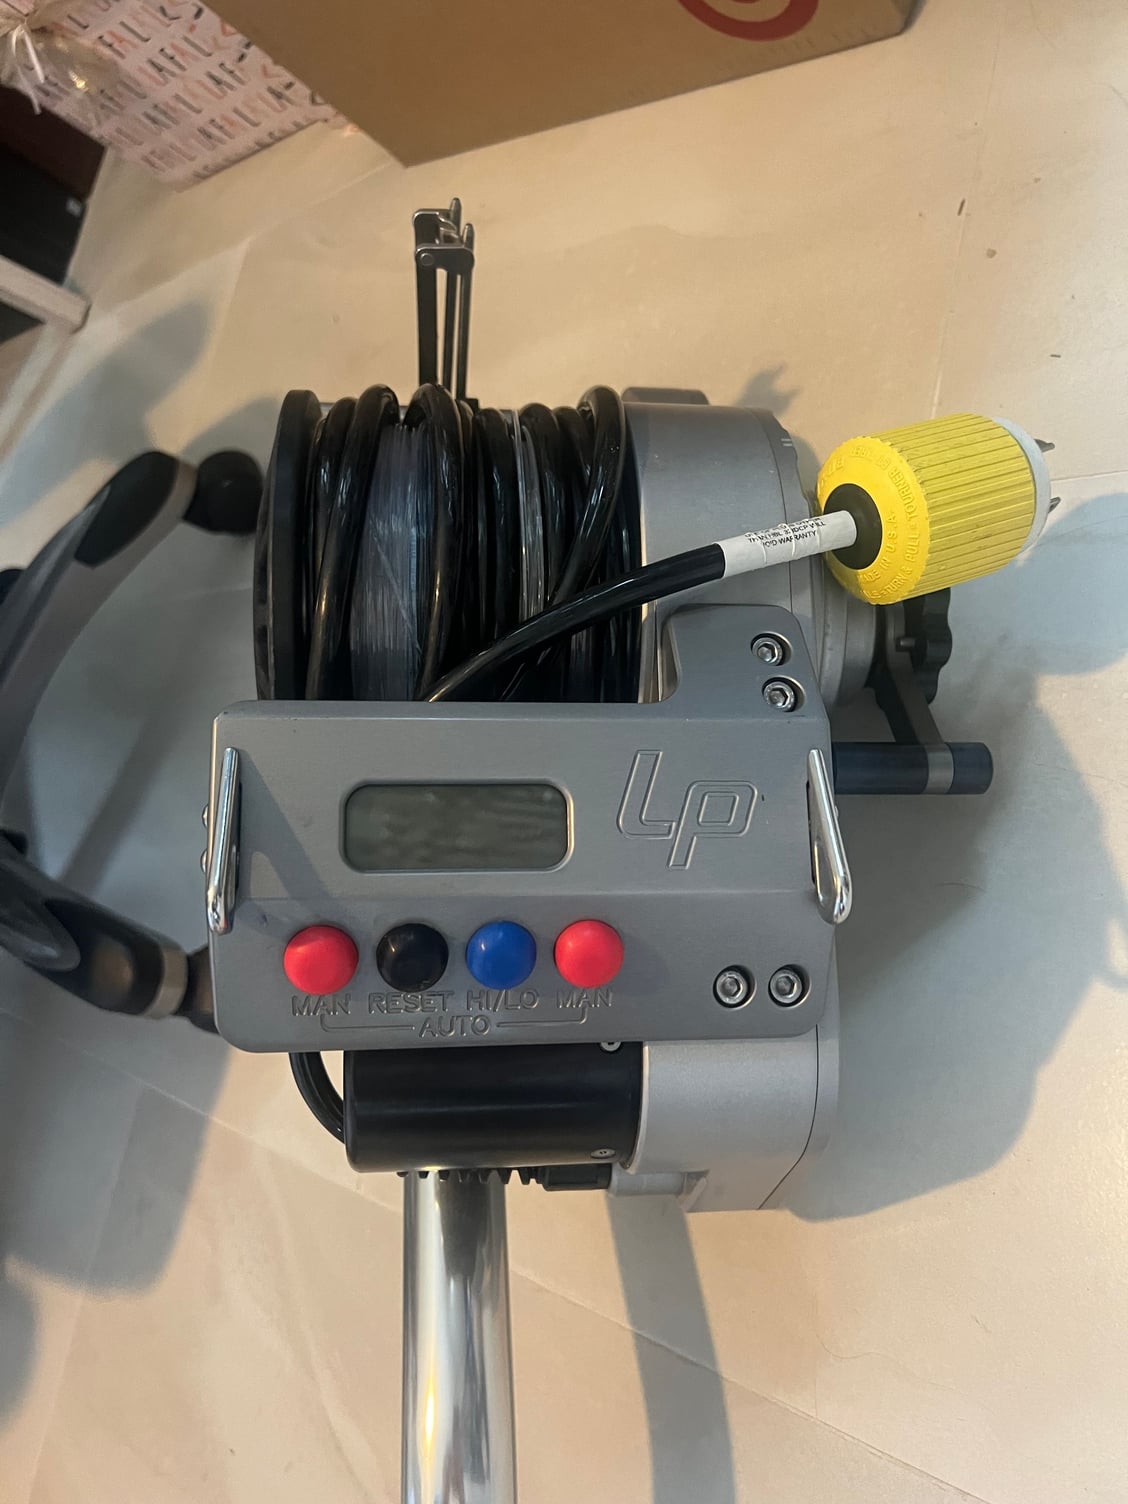 Lindgren pitman s-1200 electric reel - The Hull Truth - Boating